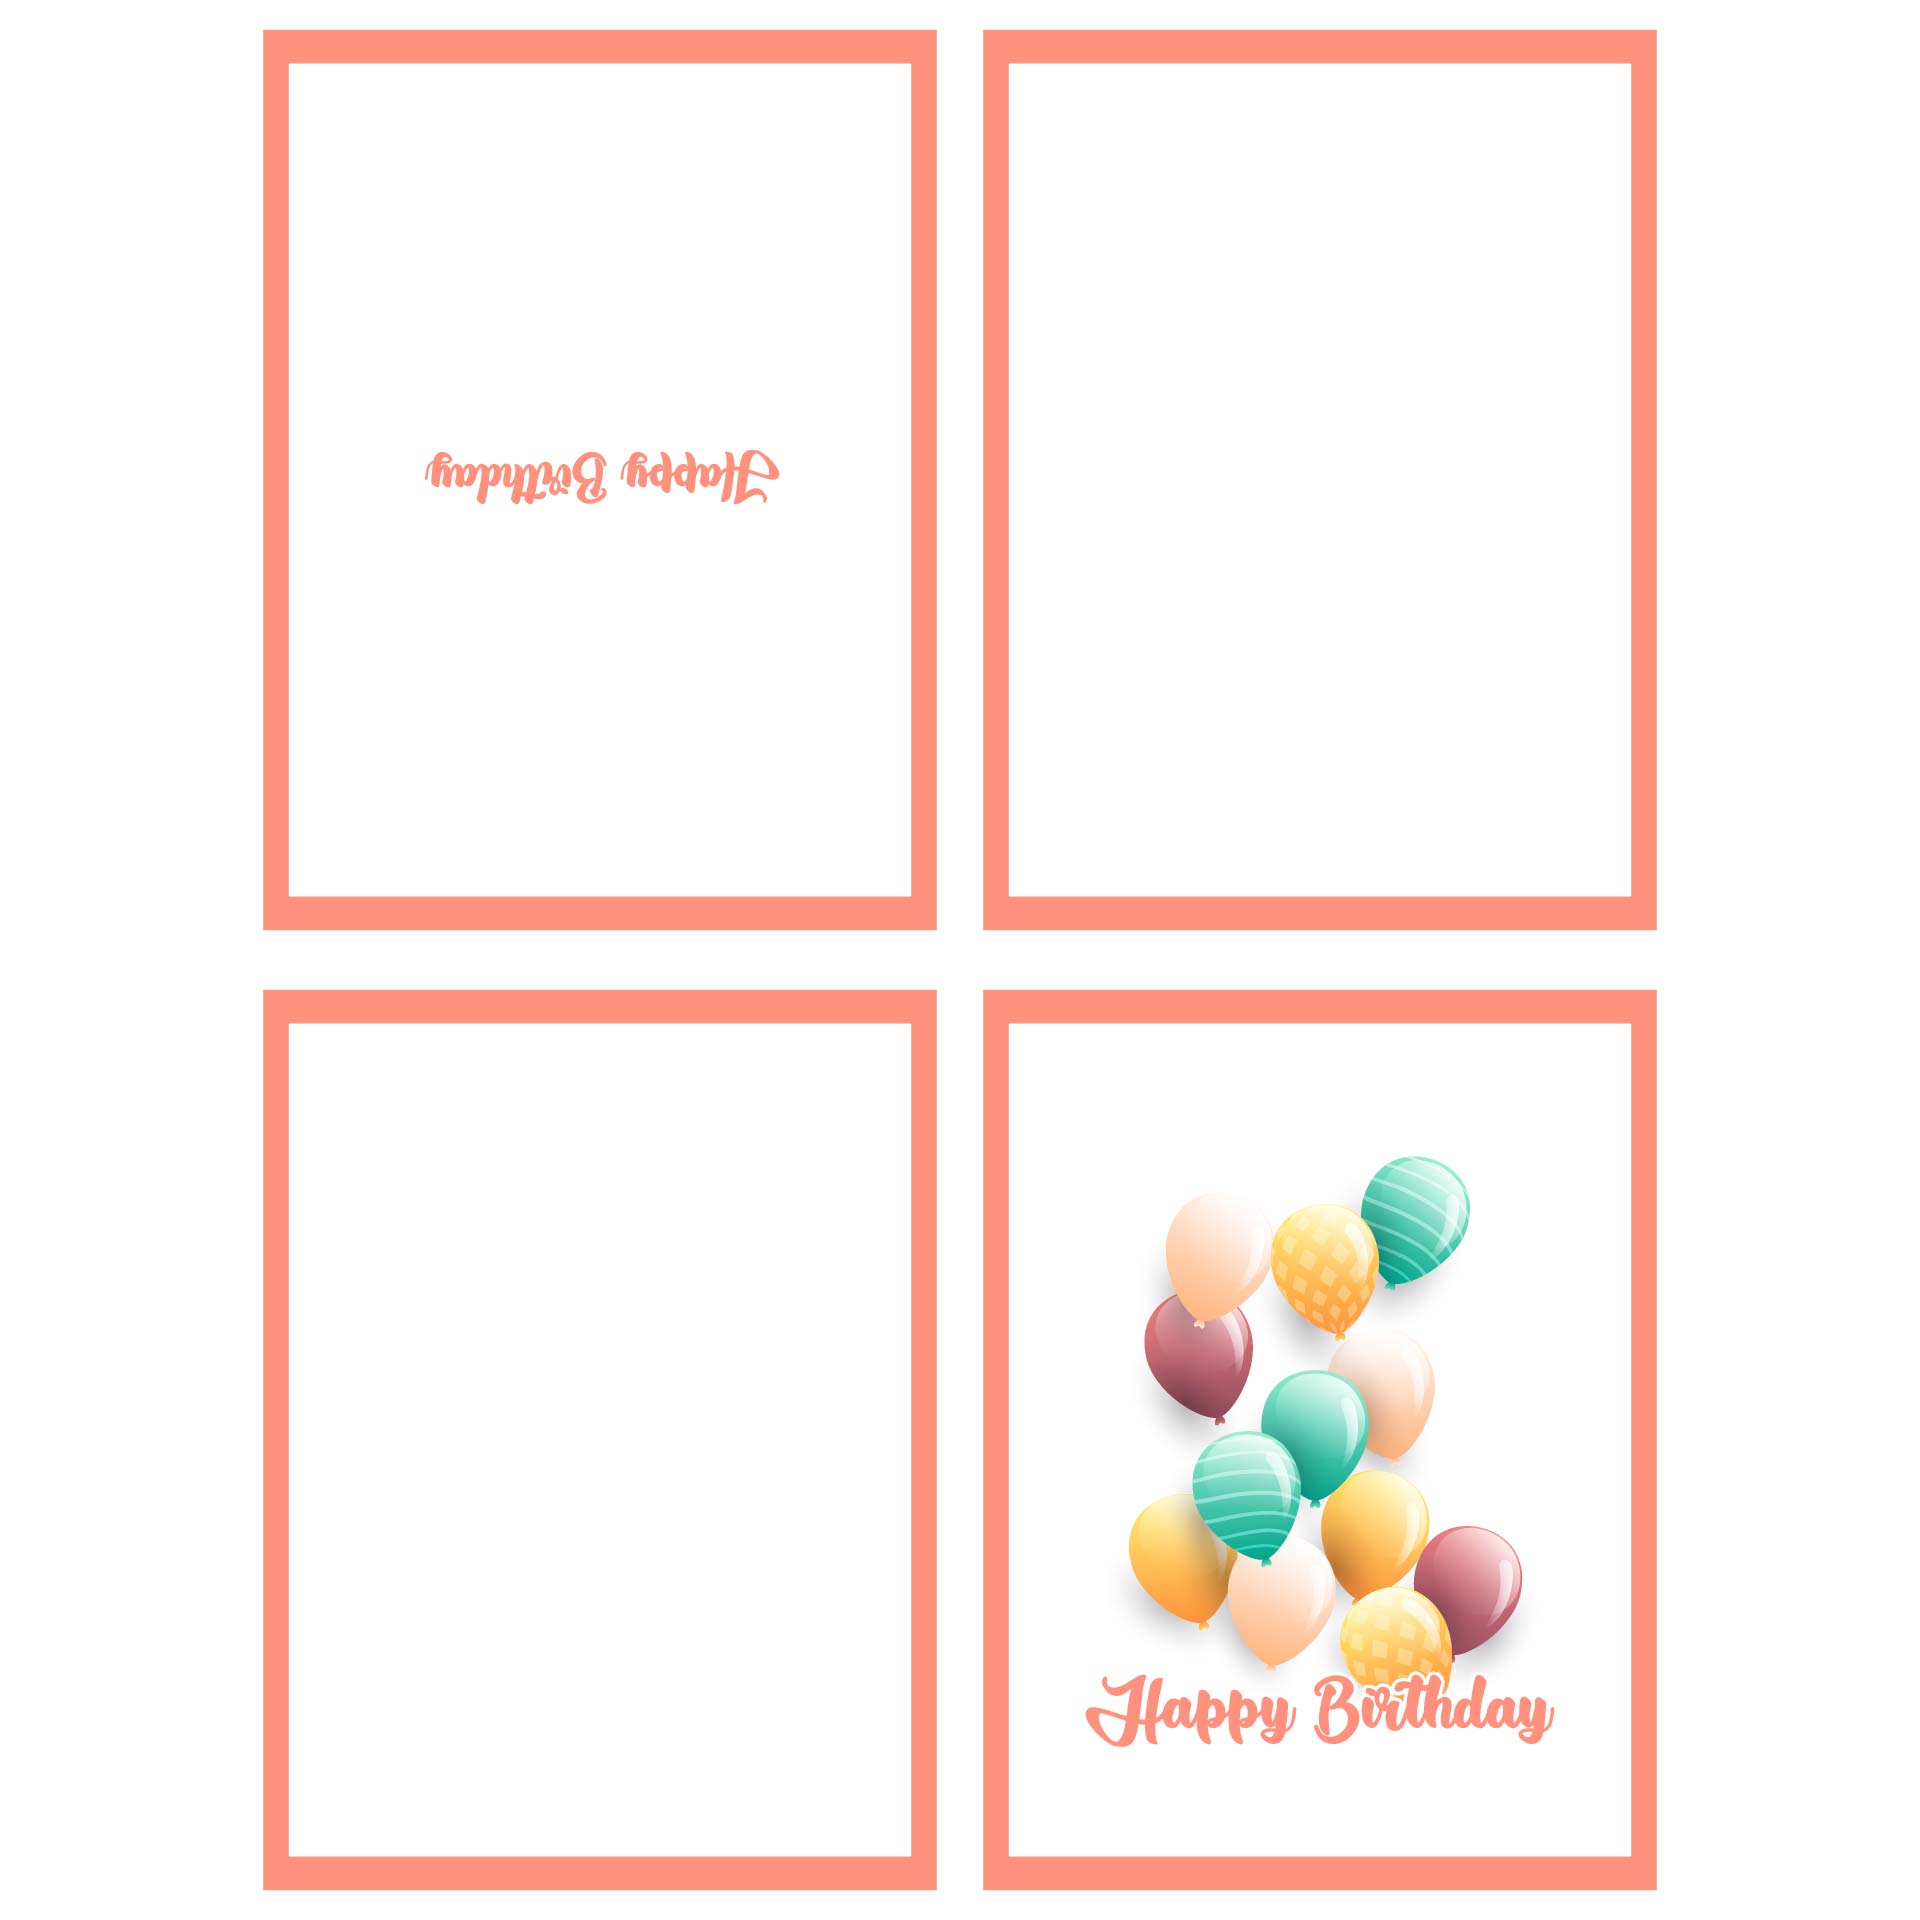 Four Fold Greeting Card Template